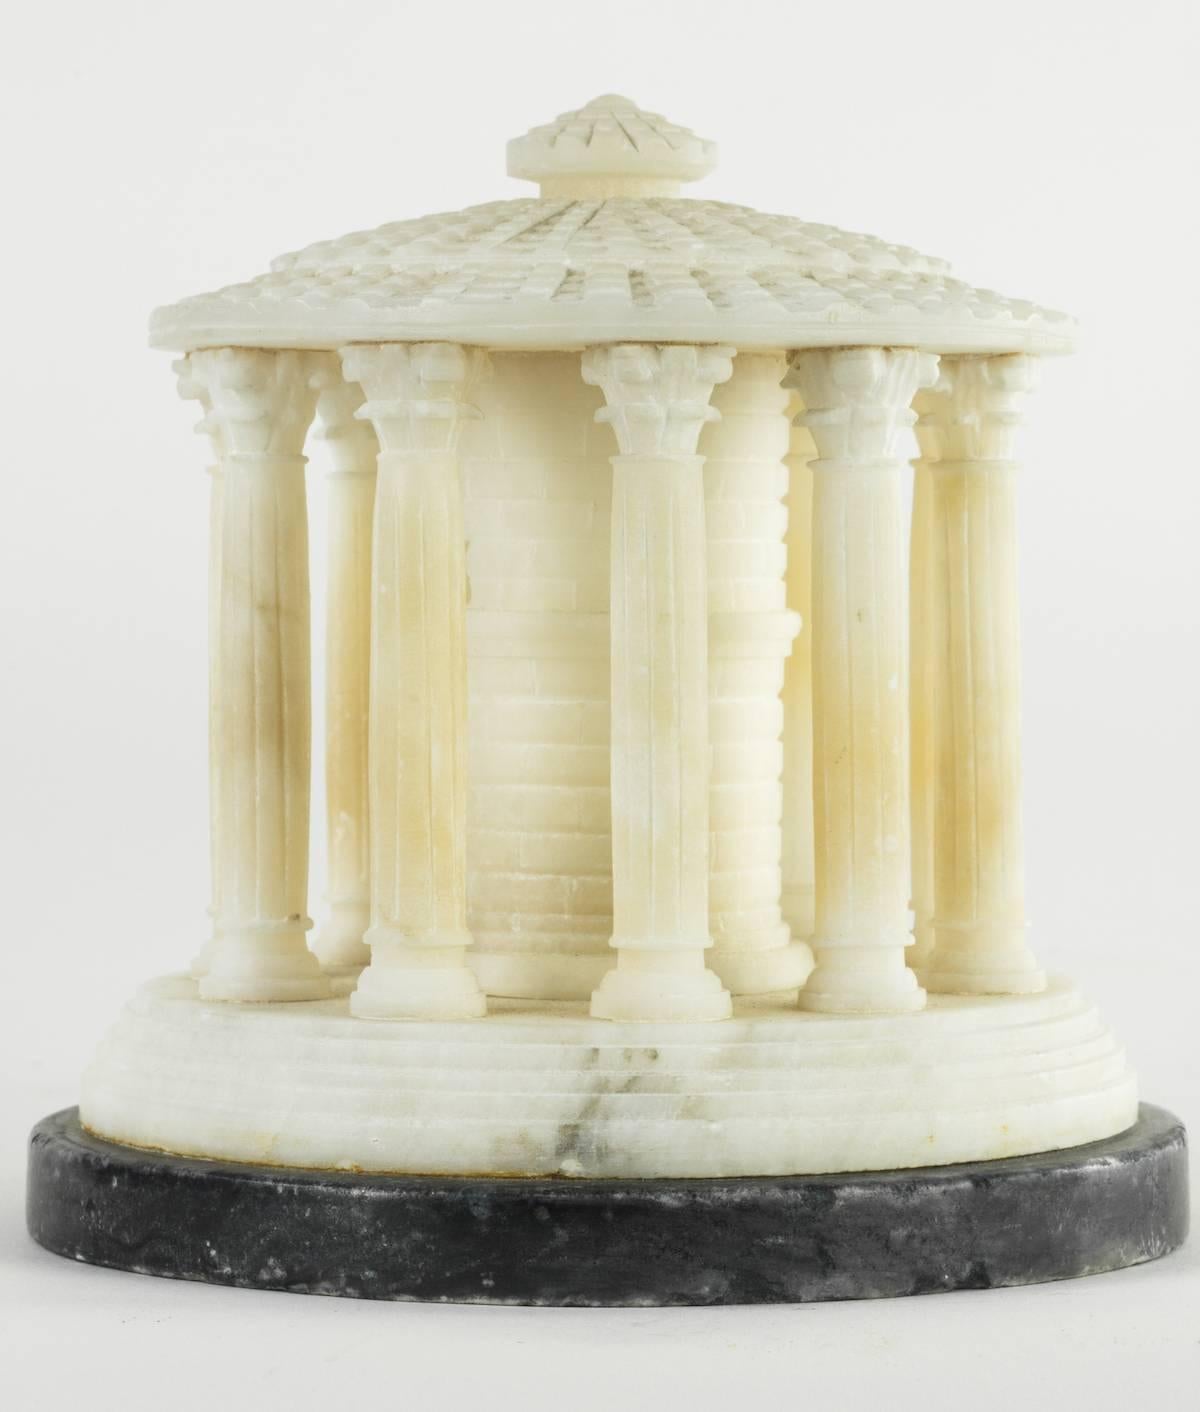 This white alabaster architectural model of Rome's Temple of Hercules Victor, commonly referred to as the Temple of Vesta, is one of the most beloved subjects for Grand Tour Souvenir architectural models. One of the most intact ancient temples in